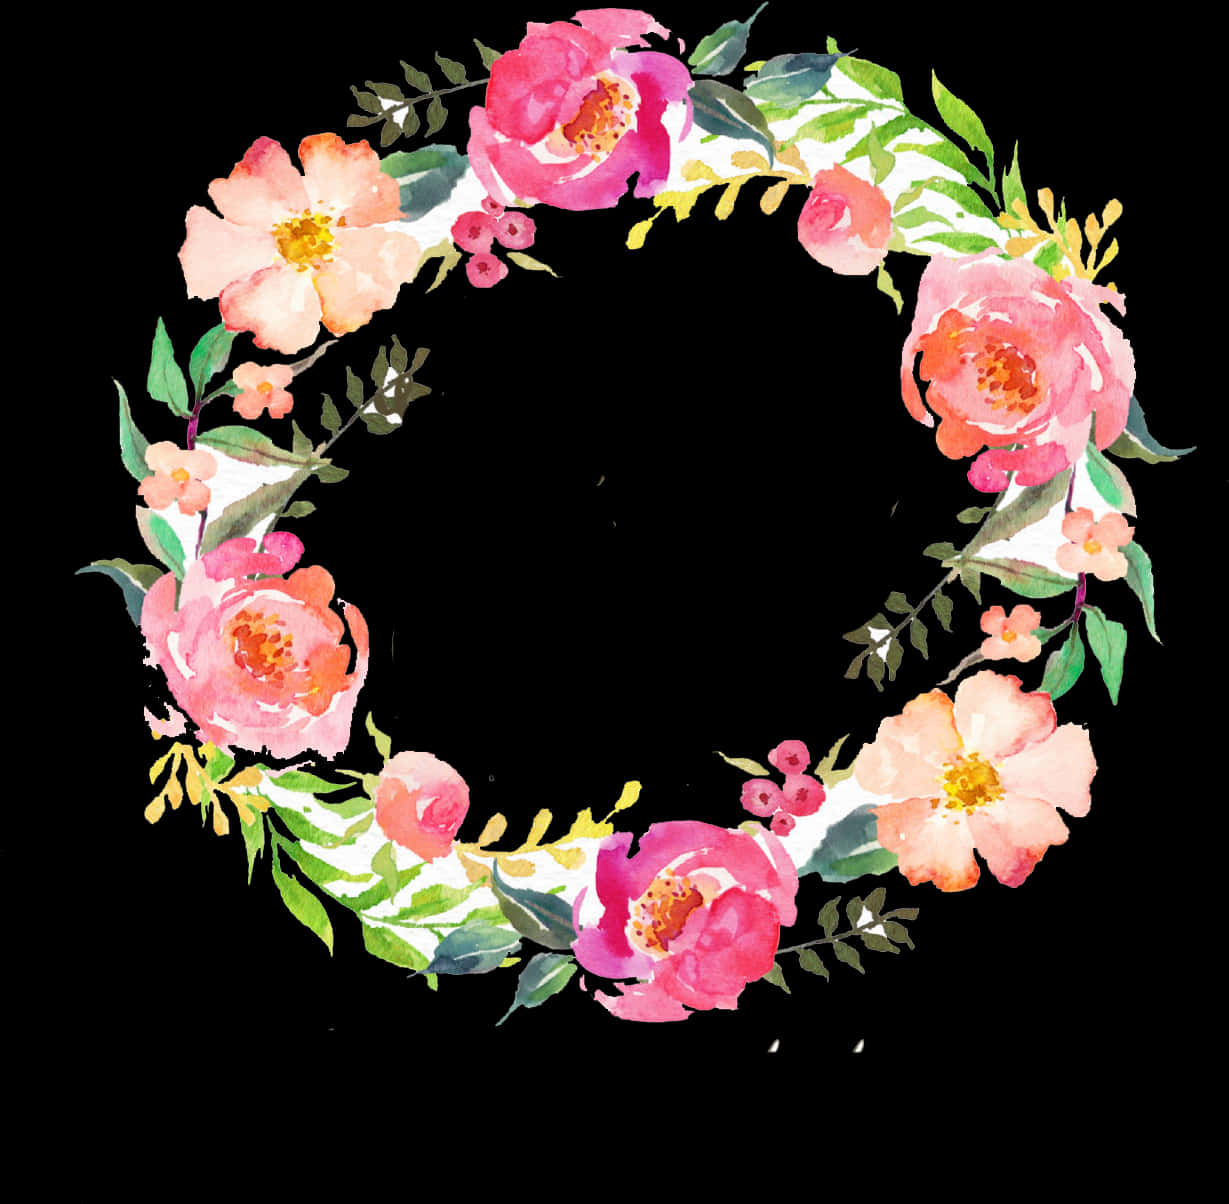 A Watercolor Wreath Of Flowers